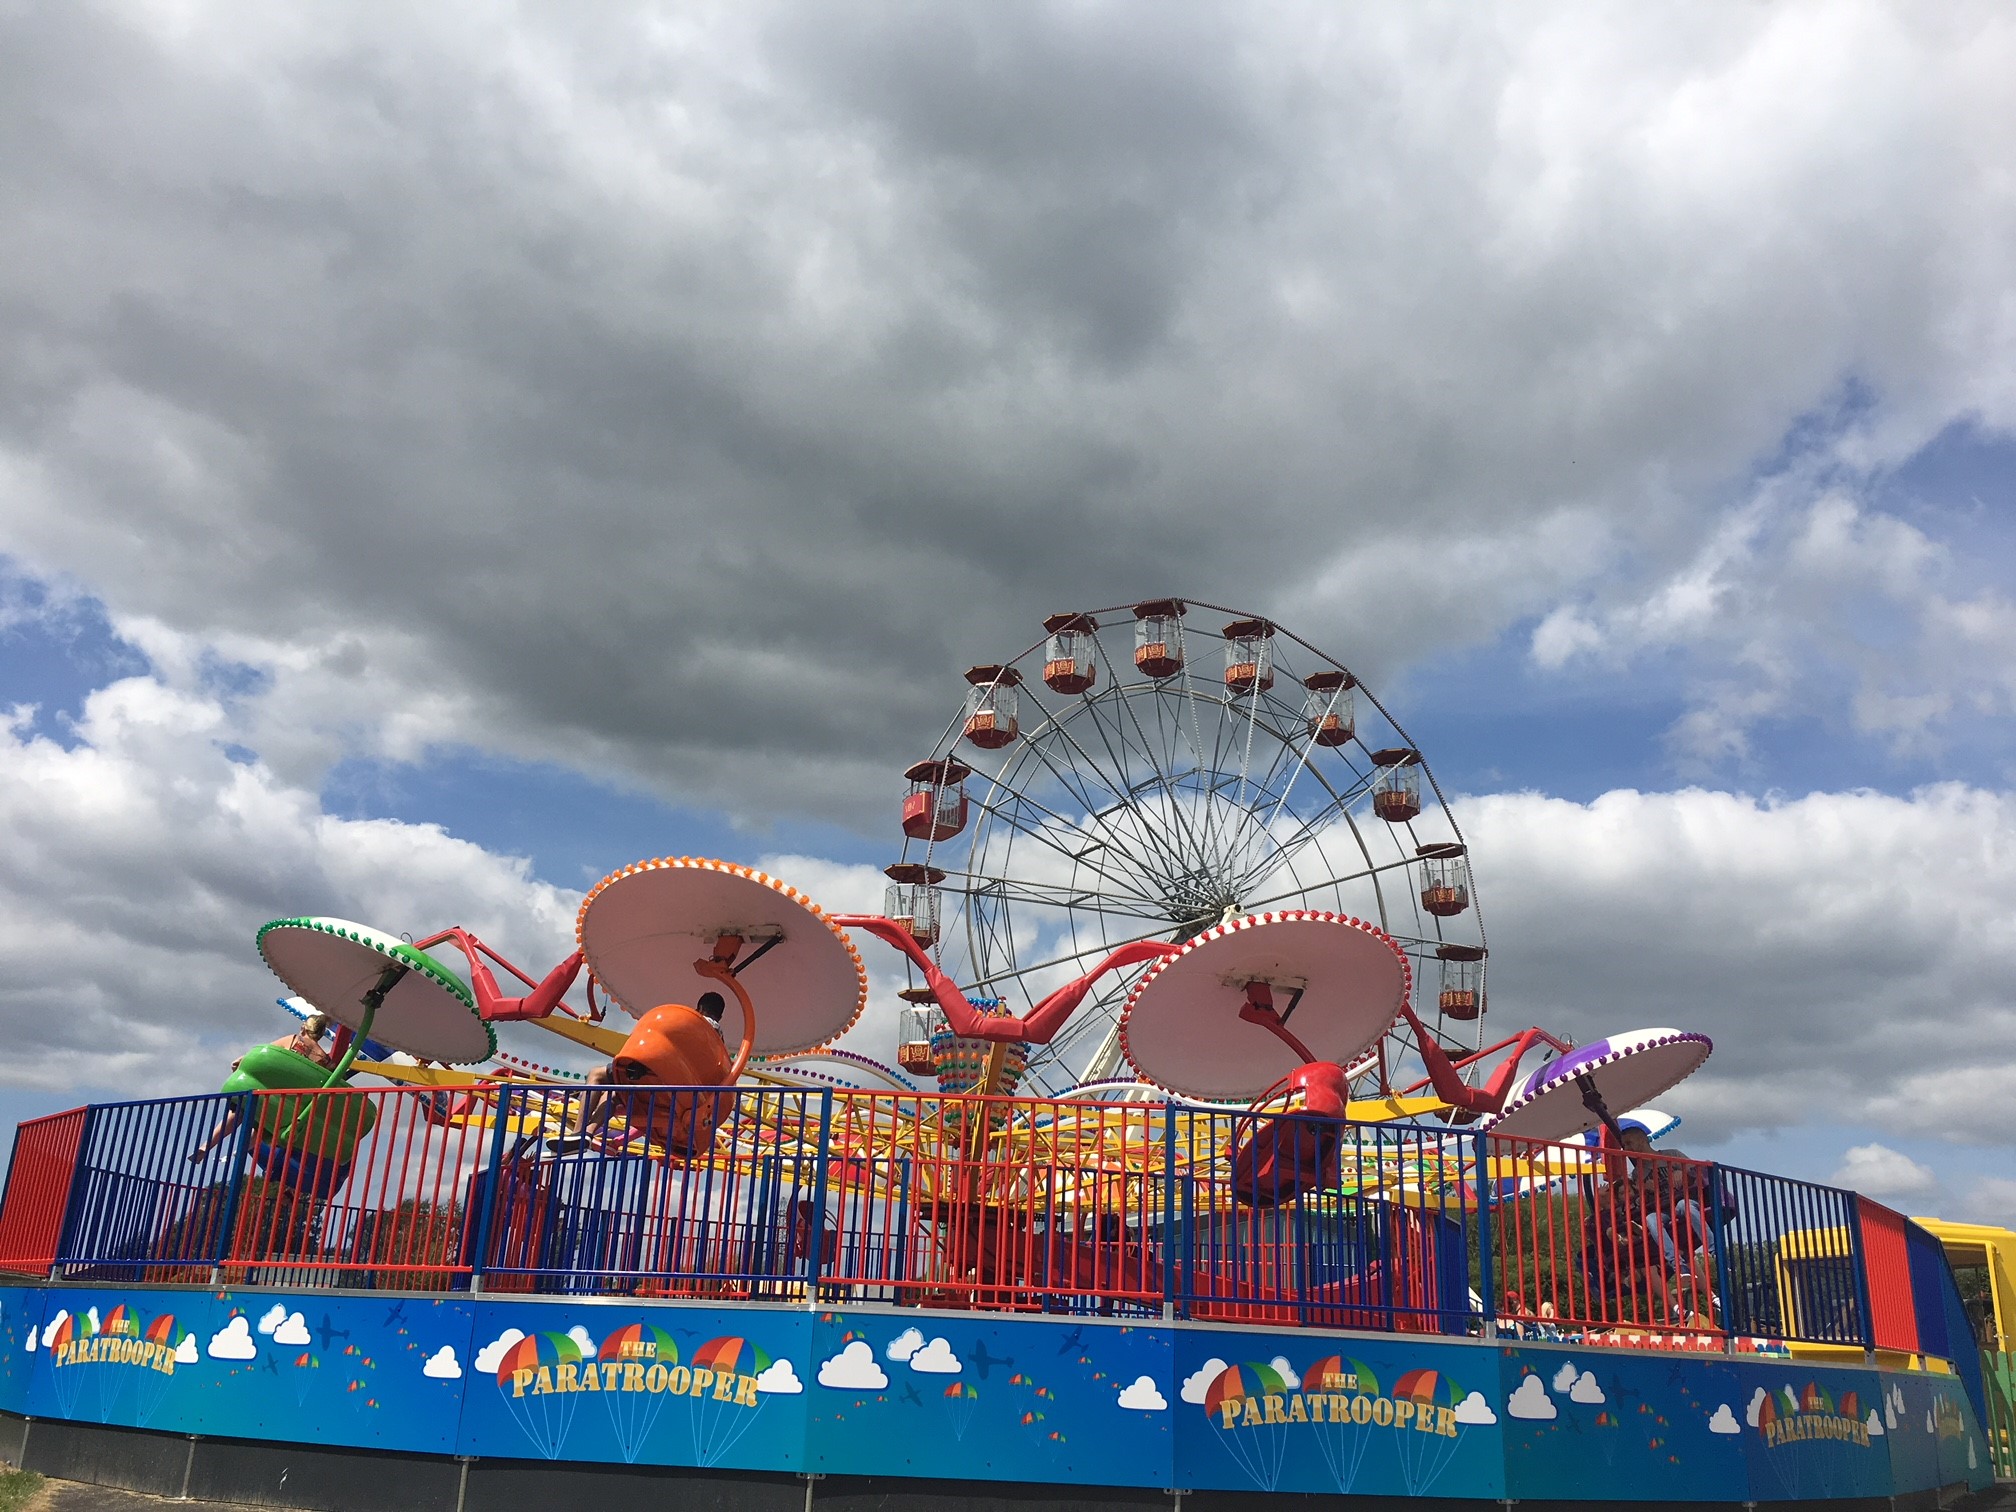 The Paratrooper fairground ride at Folly Farm